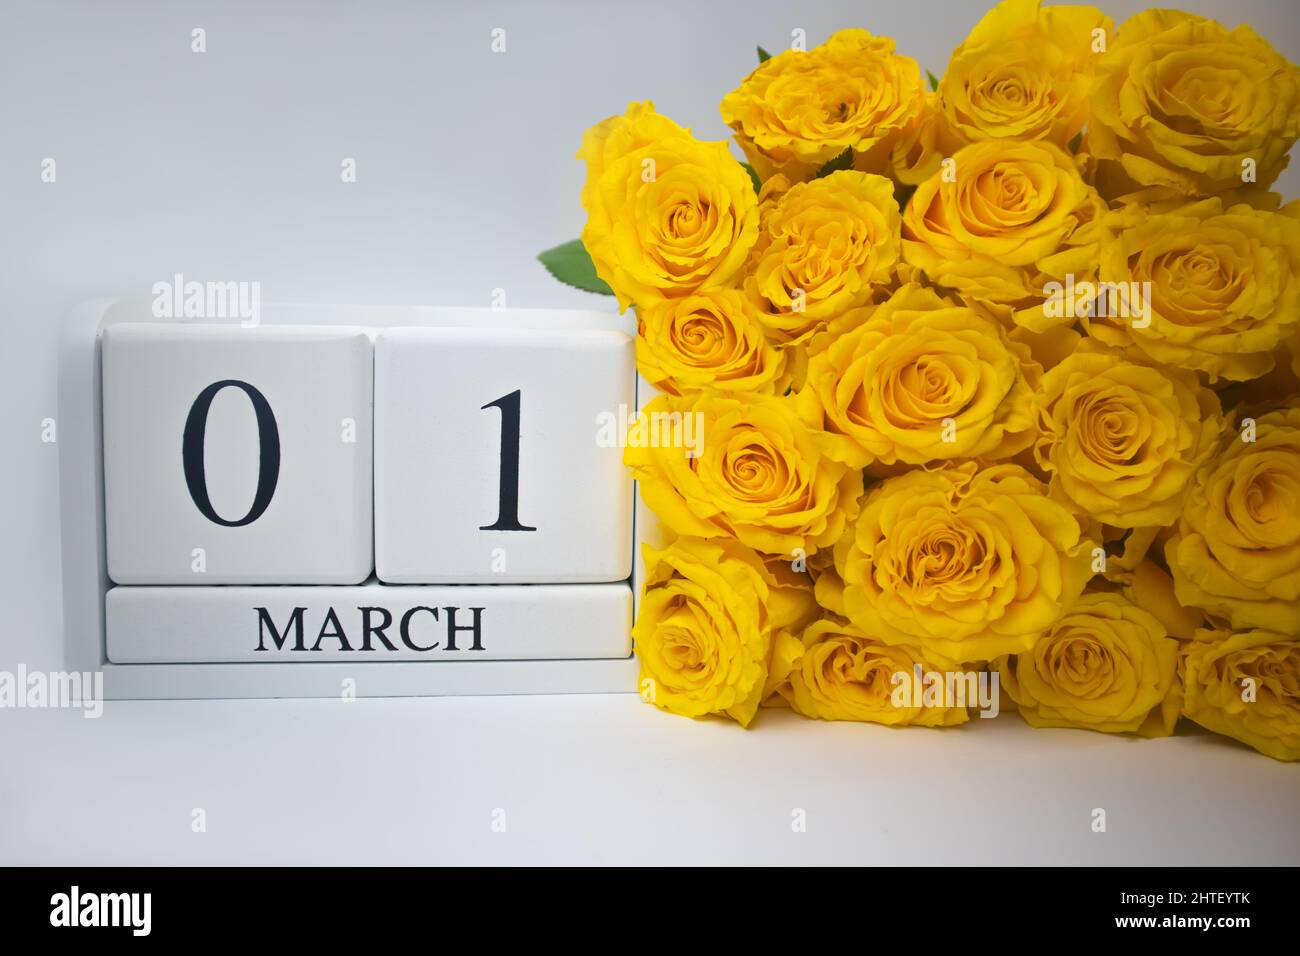 Wooden calendar March 1 and yellow roses on a white background.  Stock Photo